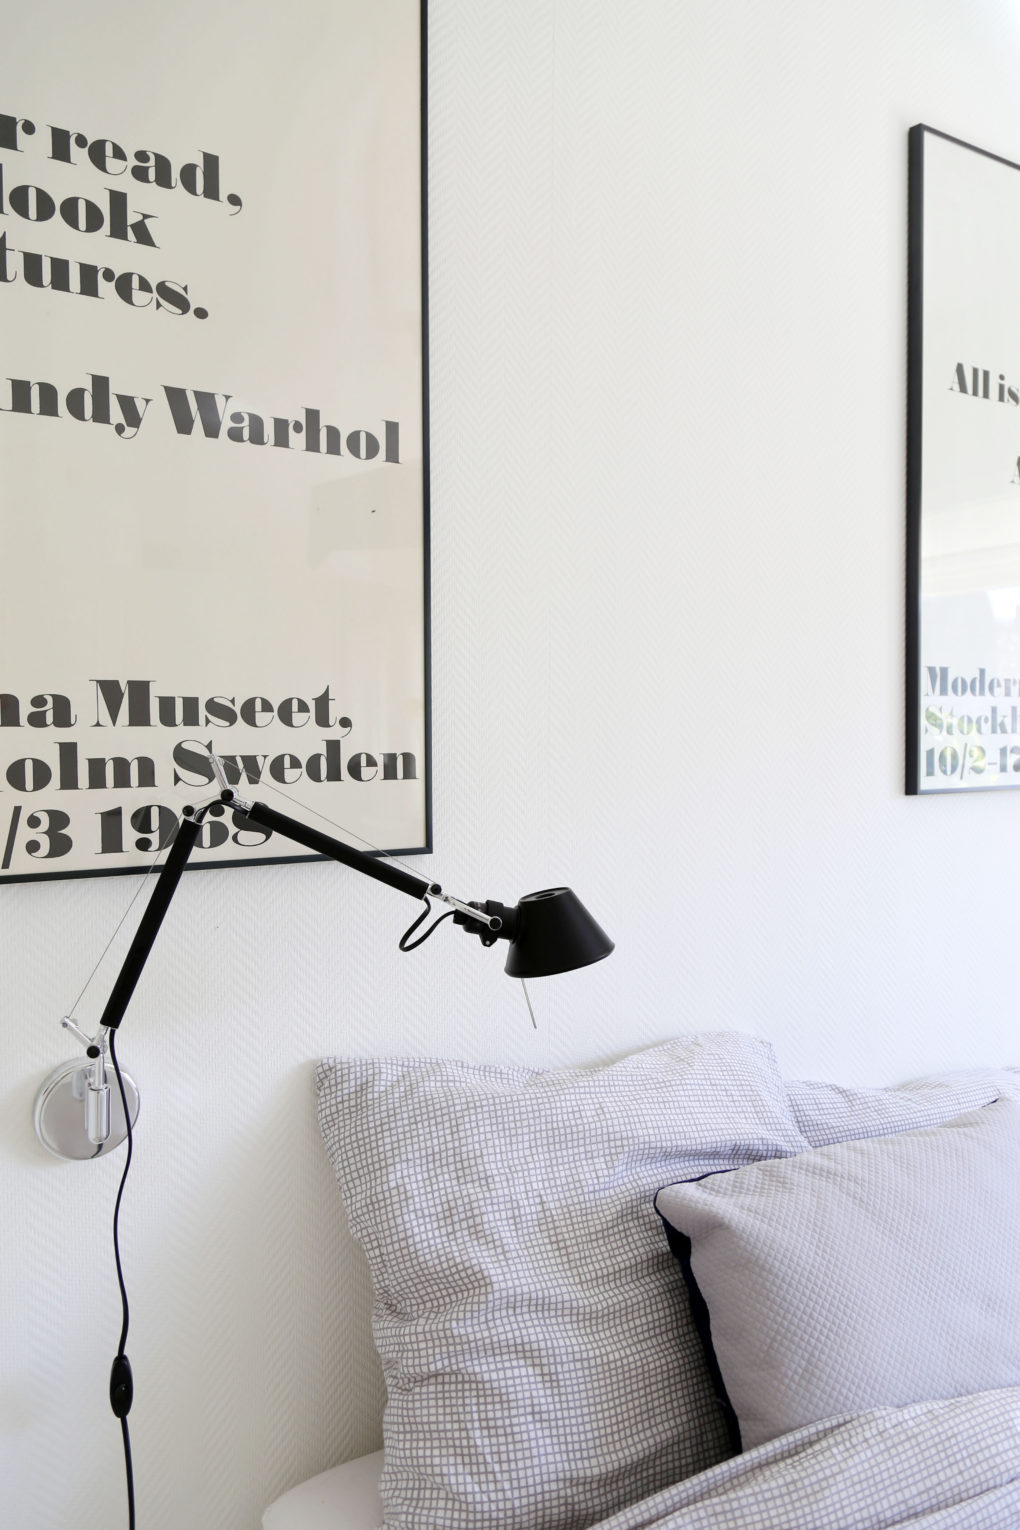 Tolomeo our bedroom review fonQ.nl donebymyself